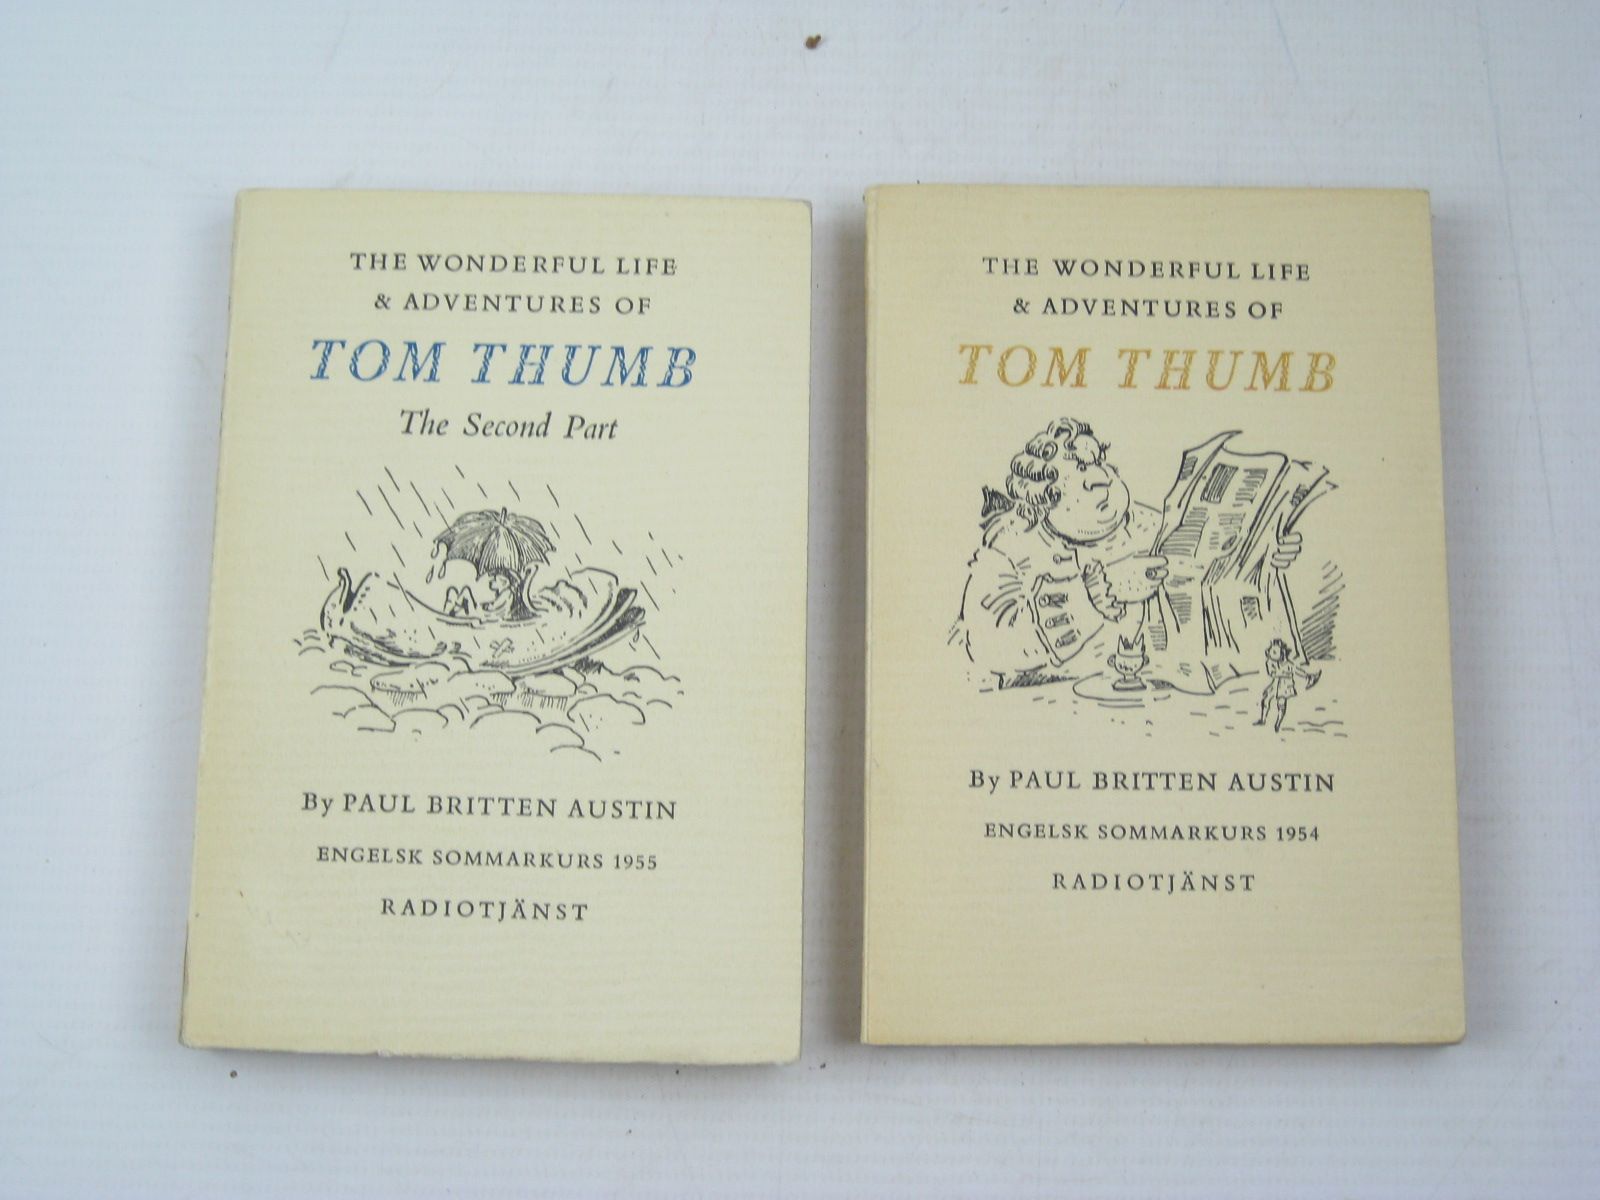 Photo of THE WONDERFUL LIFE AND ADVENTURES OF TOM THUMB written by Austin, Paul Britten illustrated by Peake, Mervyn published by Radiotjanst (STOCK CODE: 1313168)  for sale by Stella & Rose's Books